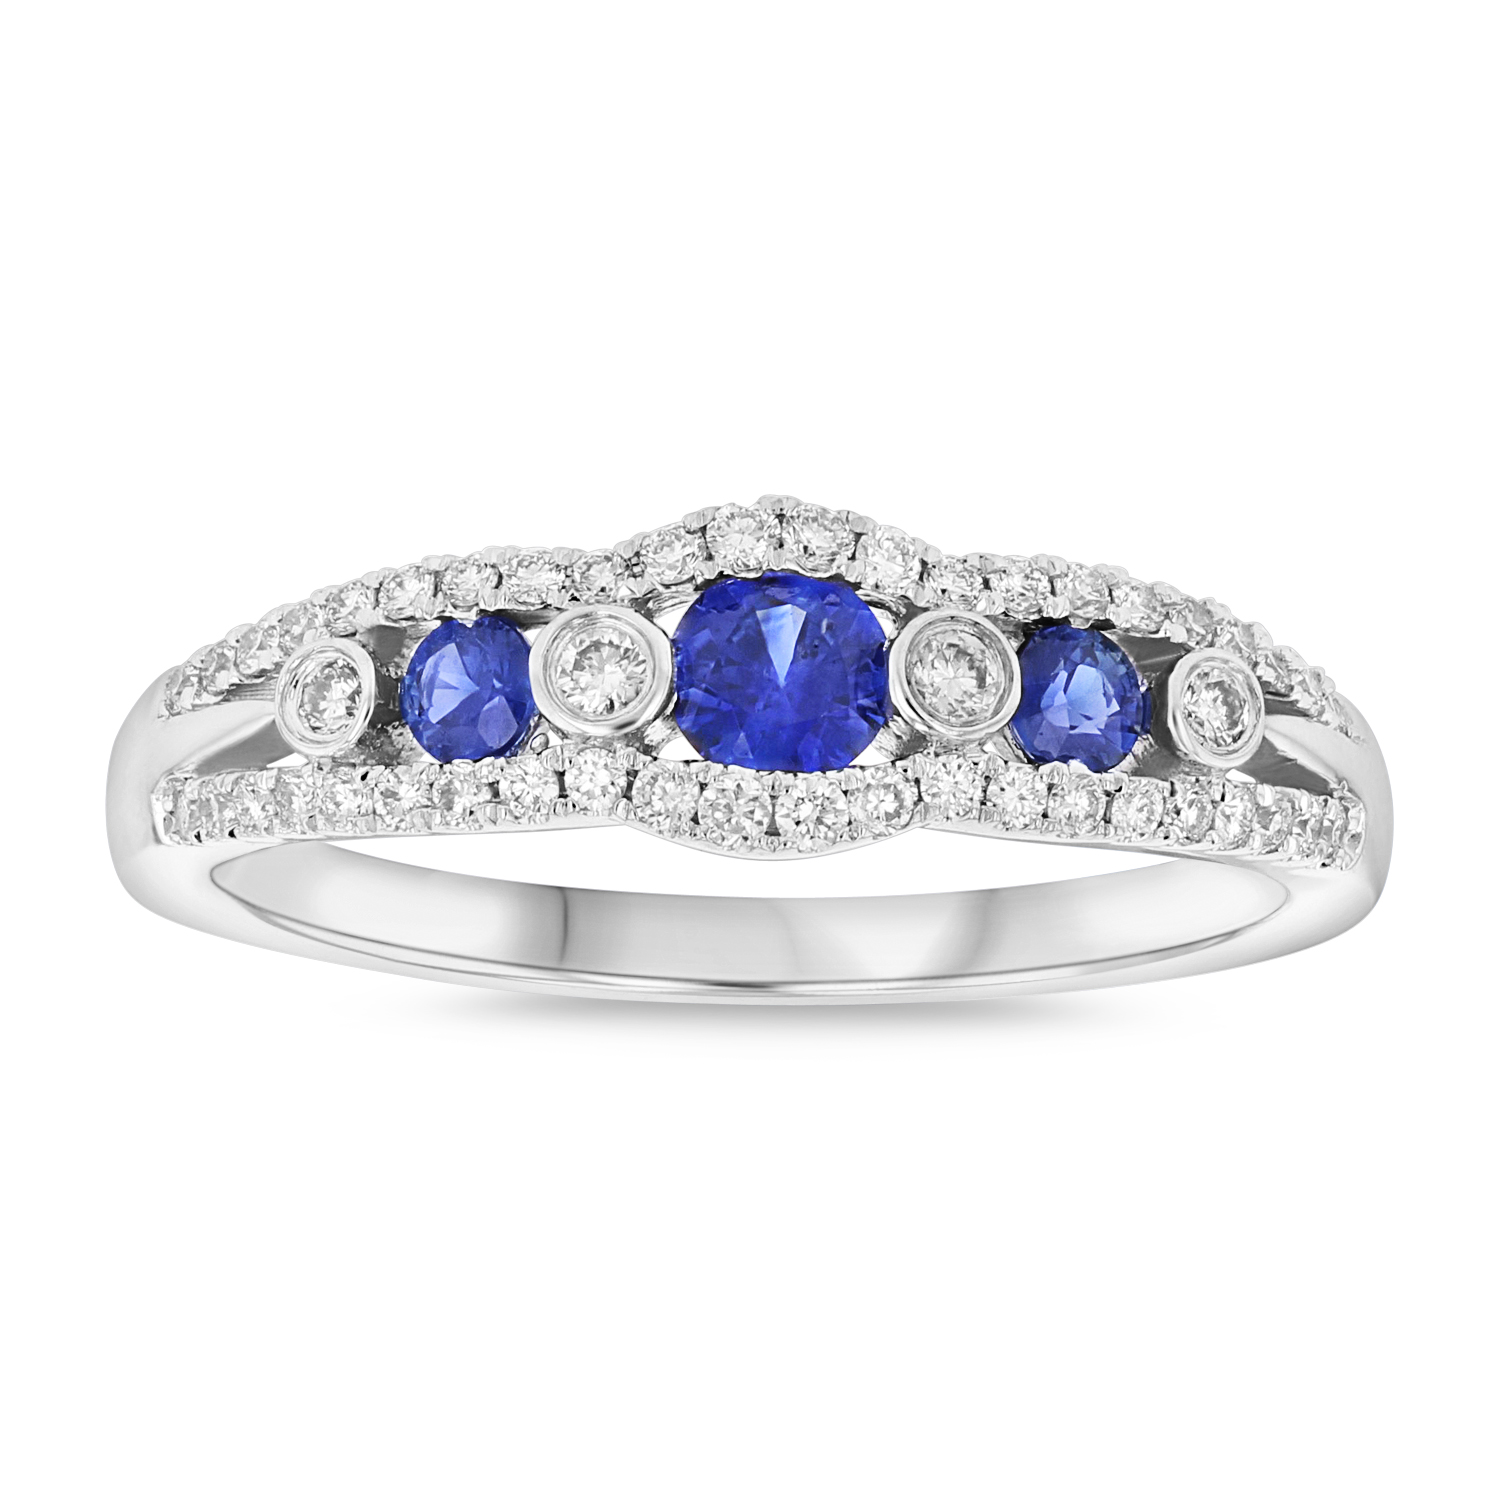 View Diamond and sapphire Ring in 14k White gold